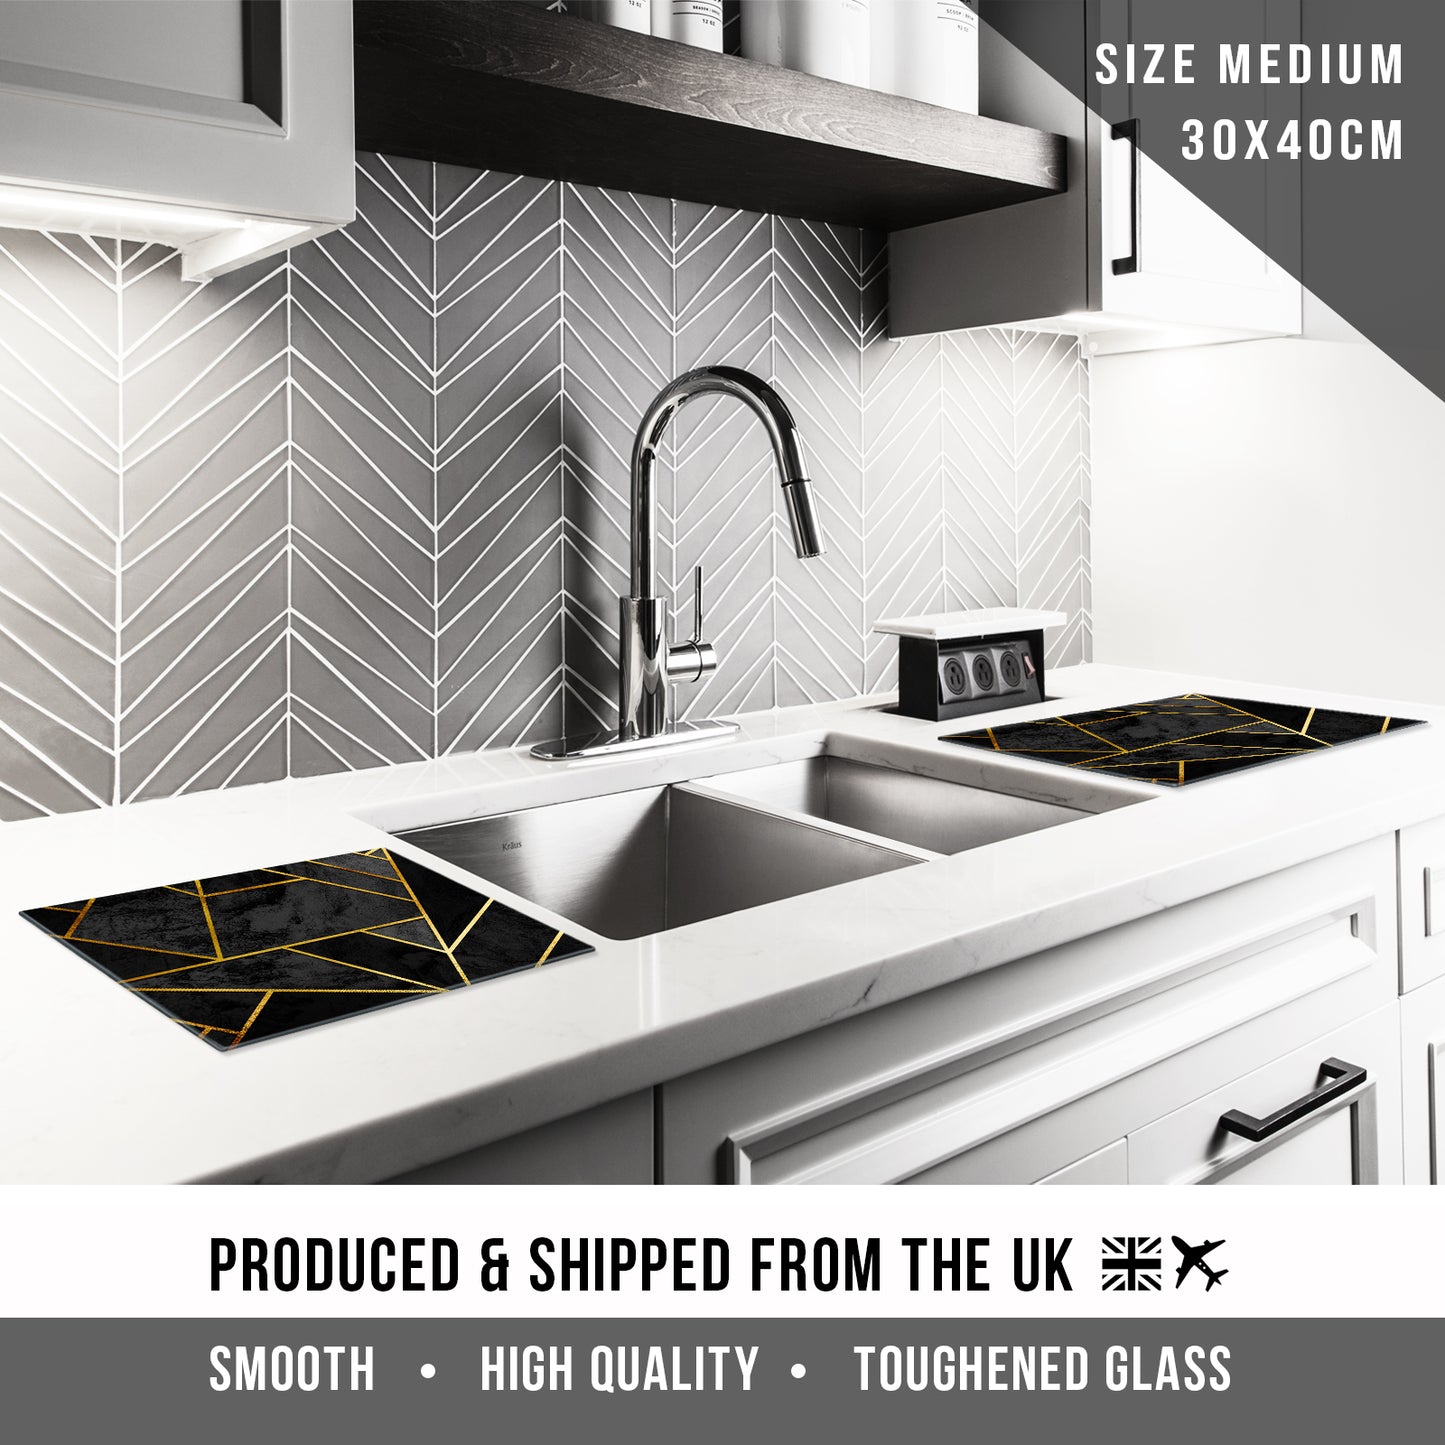 Glass Chopping Board for Kitchen in Black Gold Geometric Design 4